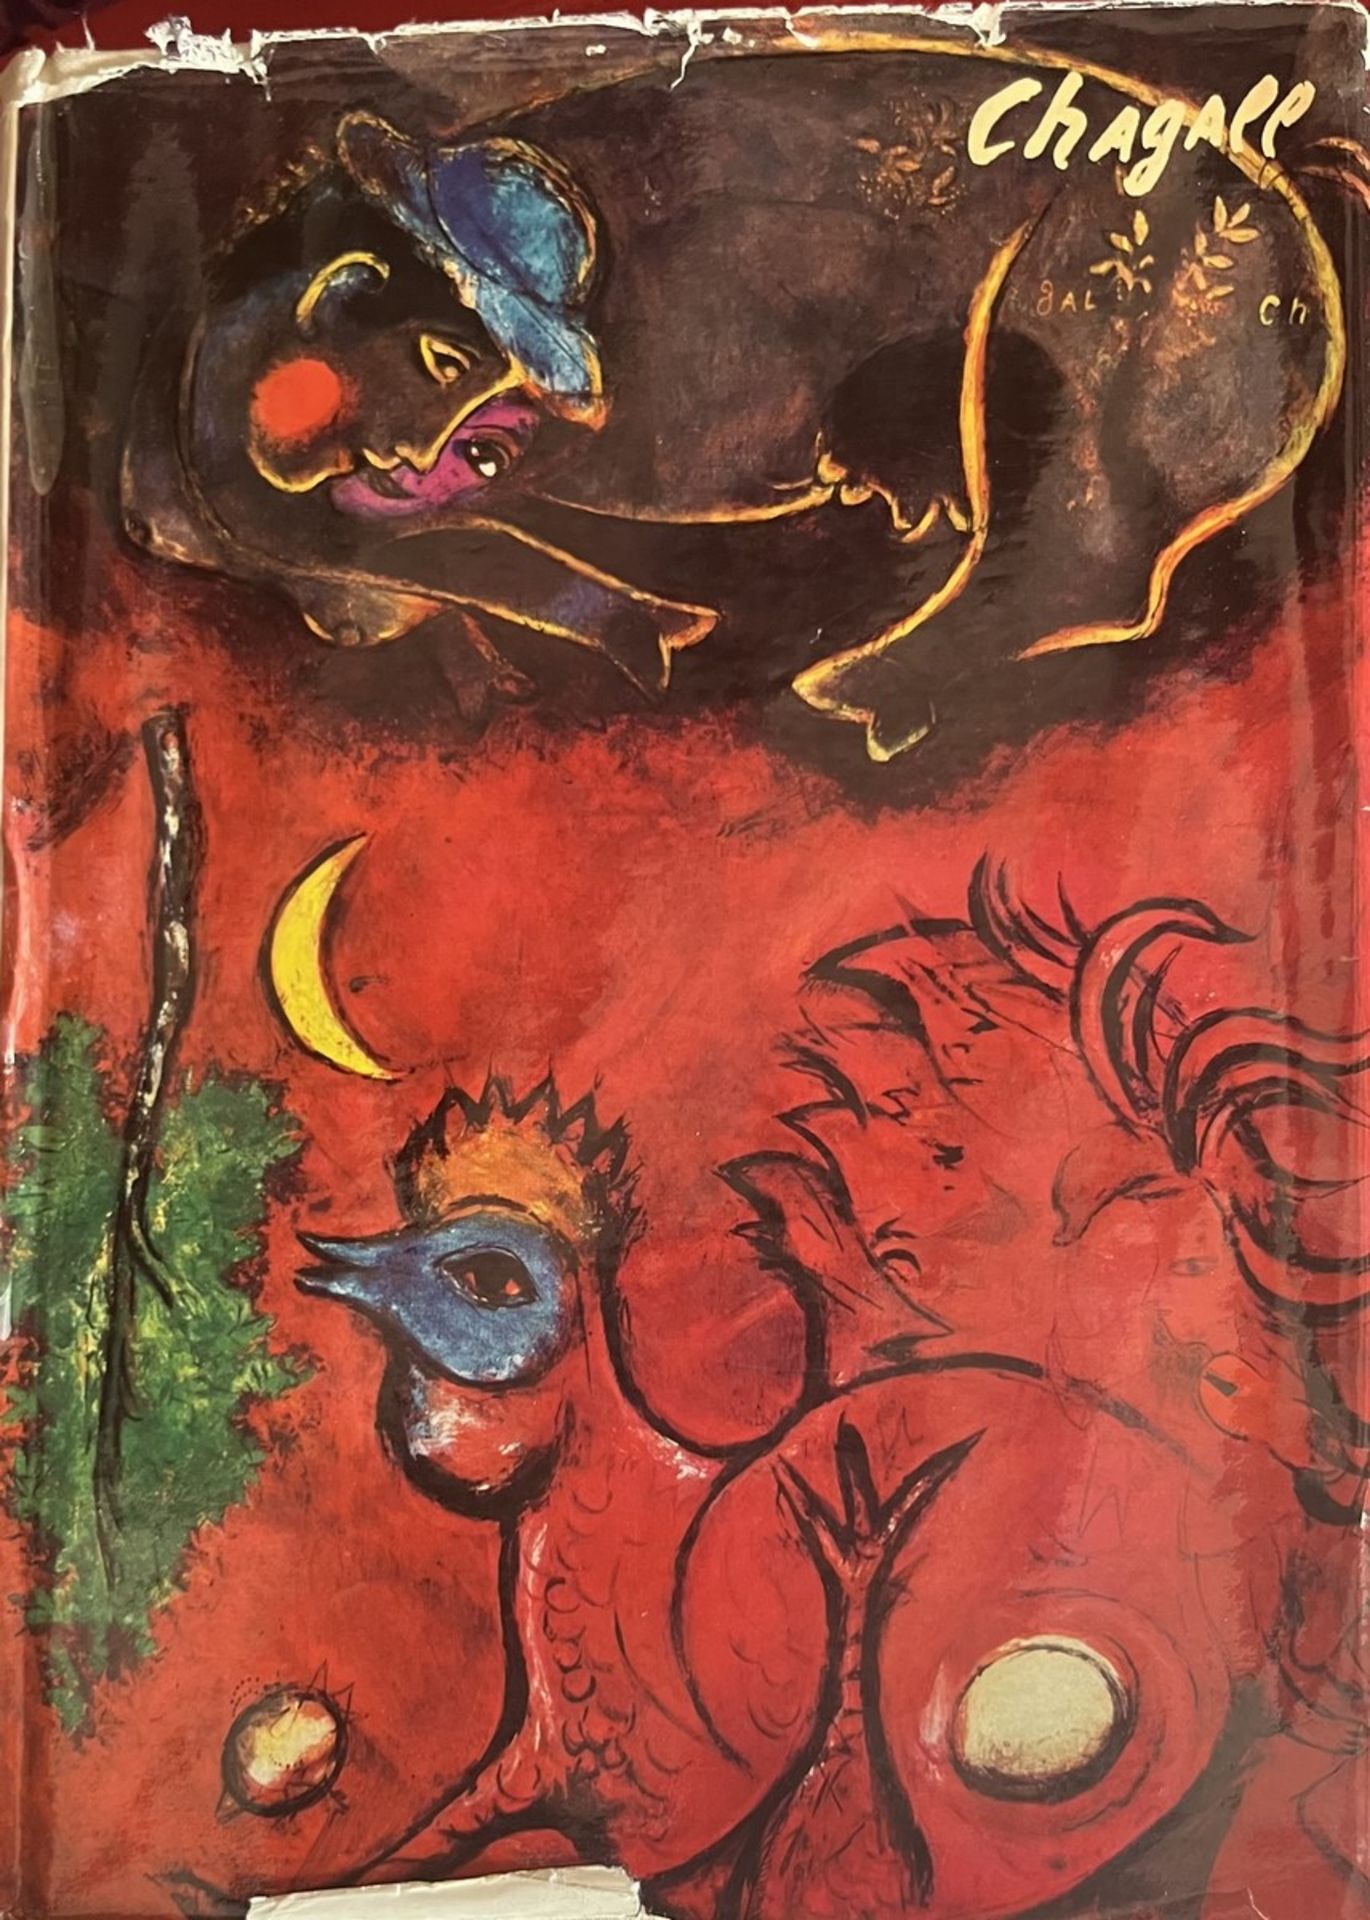 [CHAGALL]. Meyer, Franz, Chagall. - Image 3 of 3